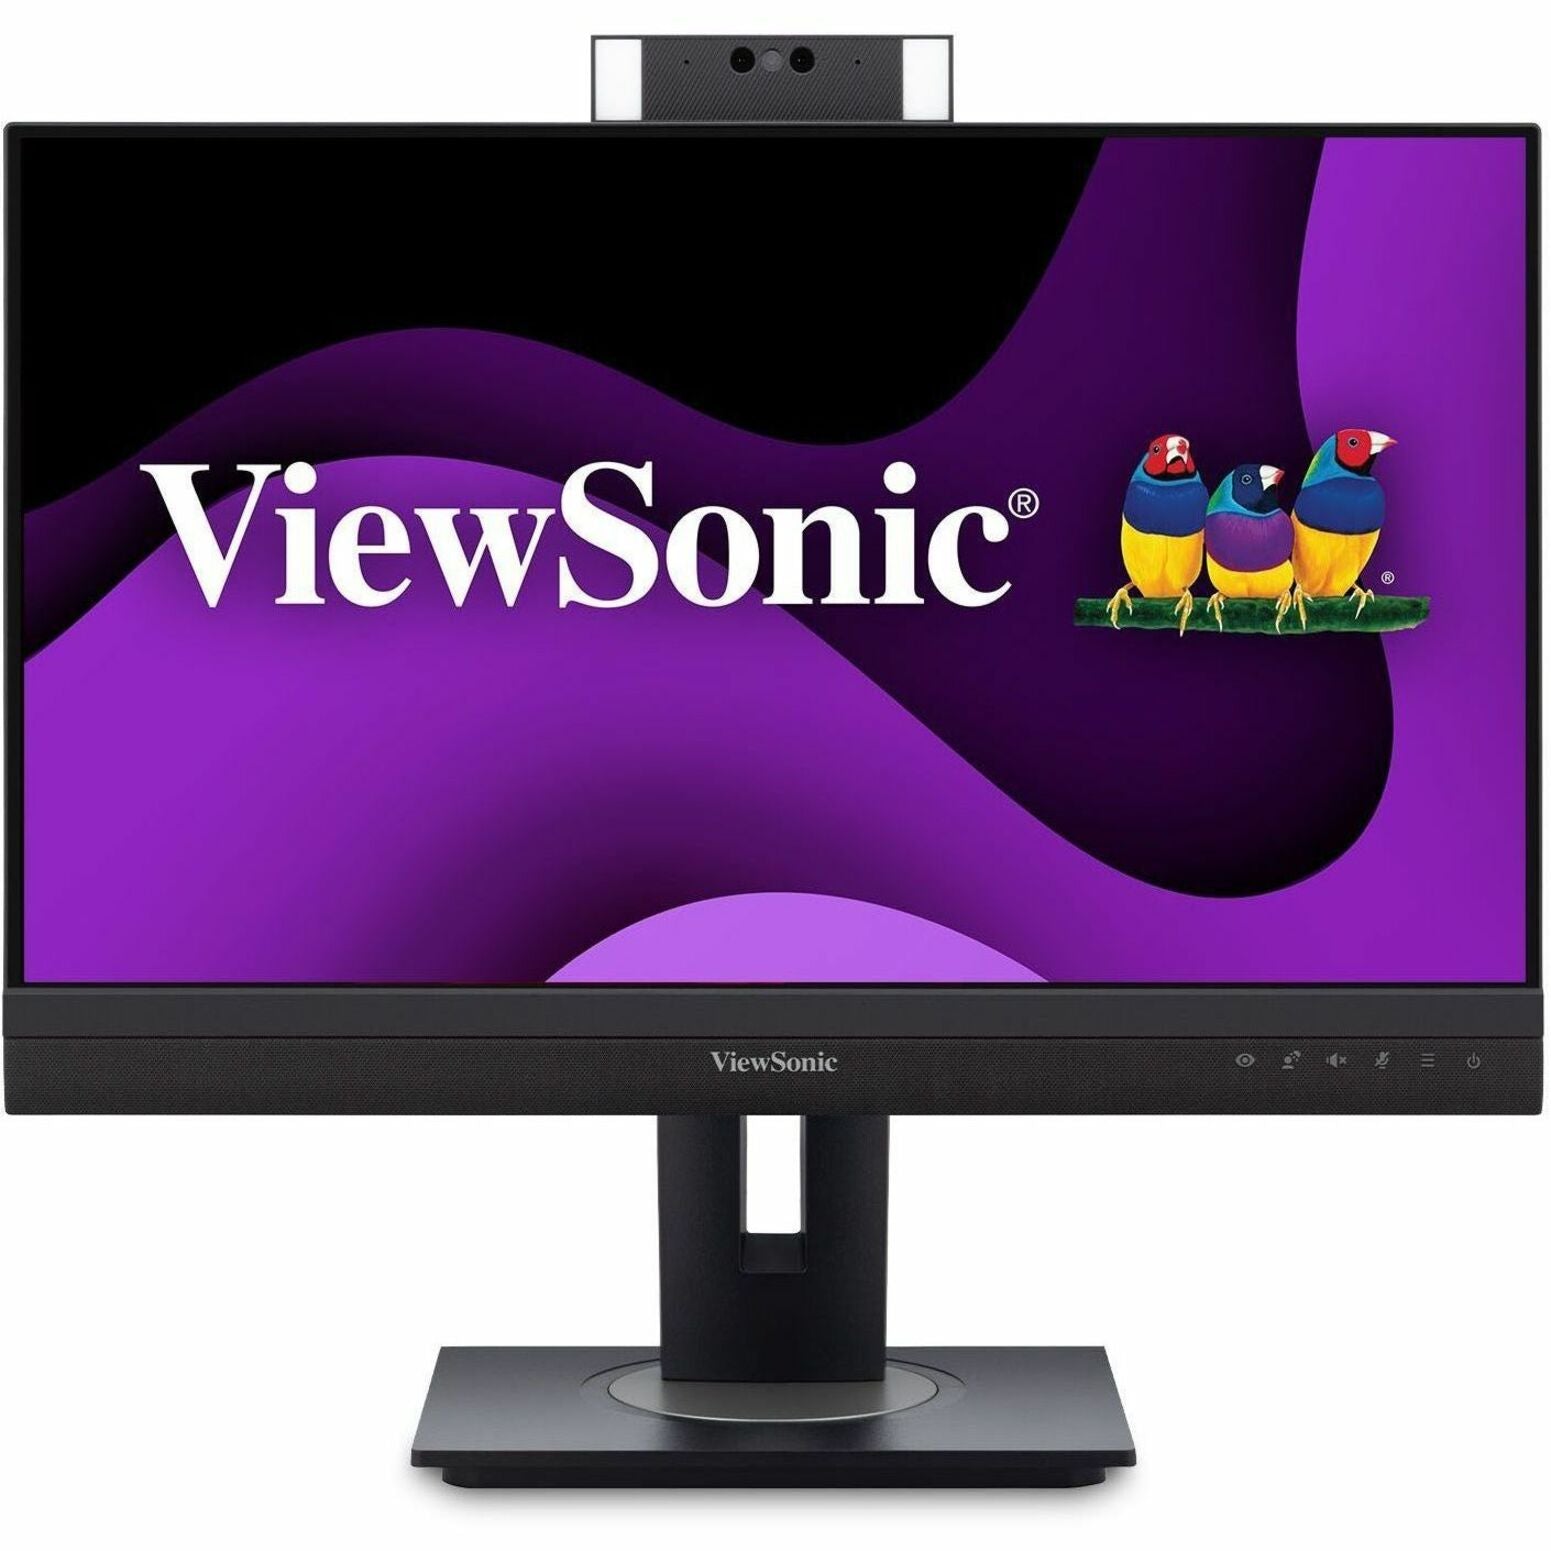 ViewSonic 24IN 1080P VIDEO CONFERENCING MONITOR WITH WINDOWS HELLO COMPATIBLE IR WEBCAM 9 (VG2457V)   ViewSonic 24IN 1080P MONITOR PER VIDEOCONFERENZE CON WEBCAM IR COMPATIBILE CON WINDOWS HELLO 9 (VG2457V)